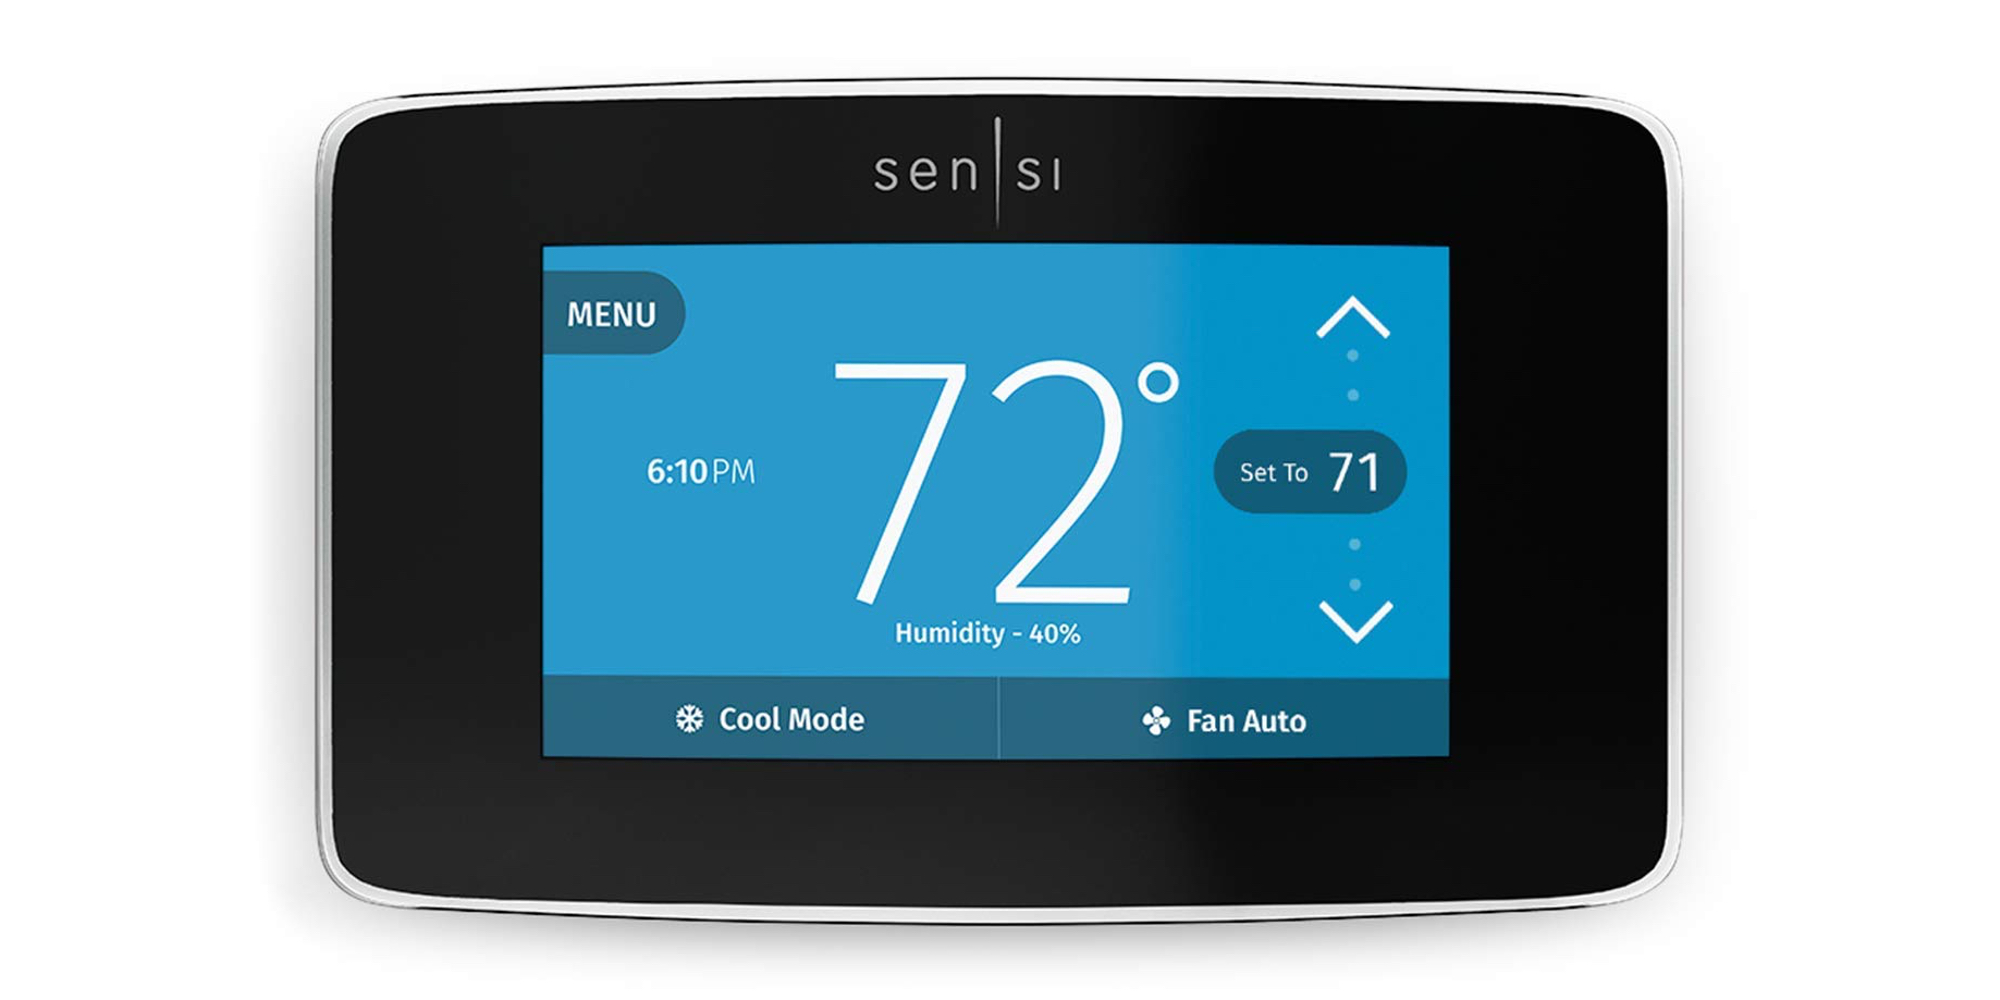 emerson-sensi-touch-keeps-your-homekit-setup-cool-this-summer-at-126